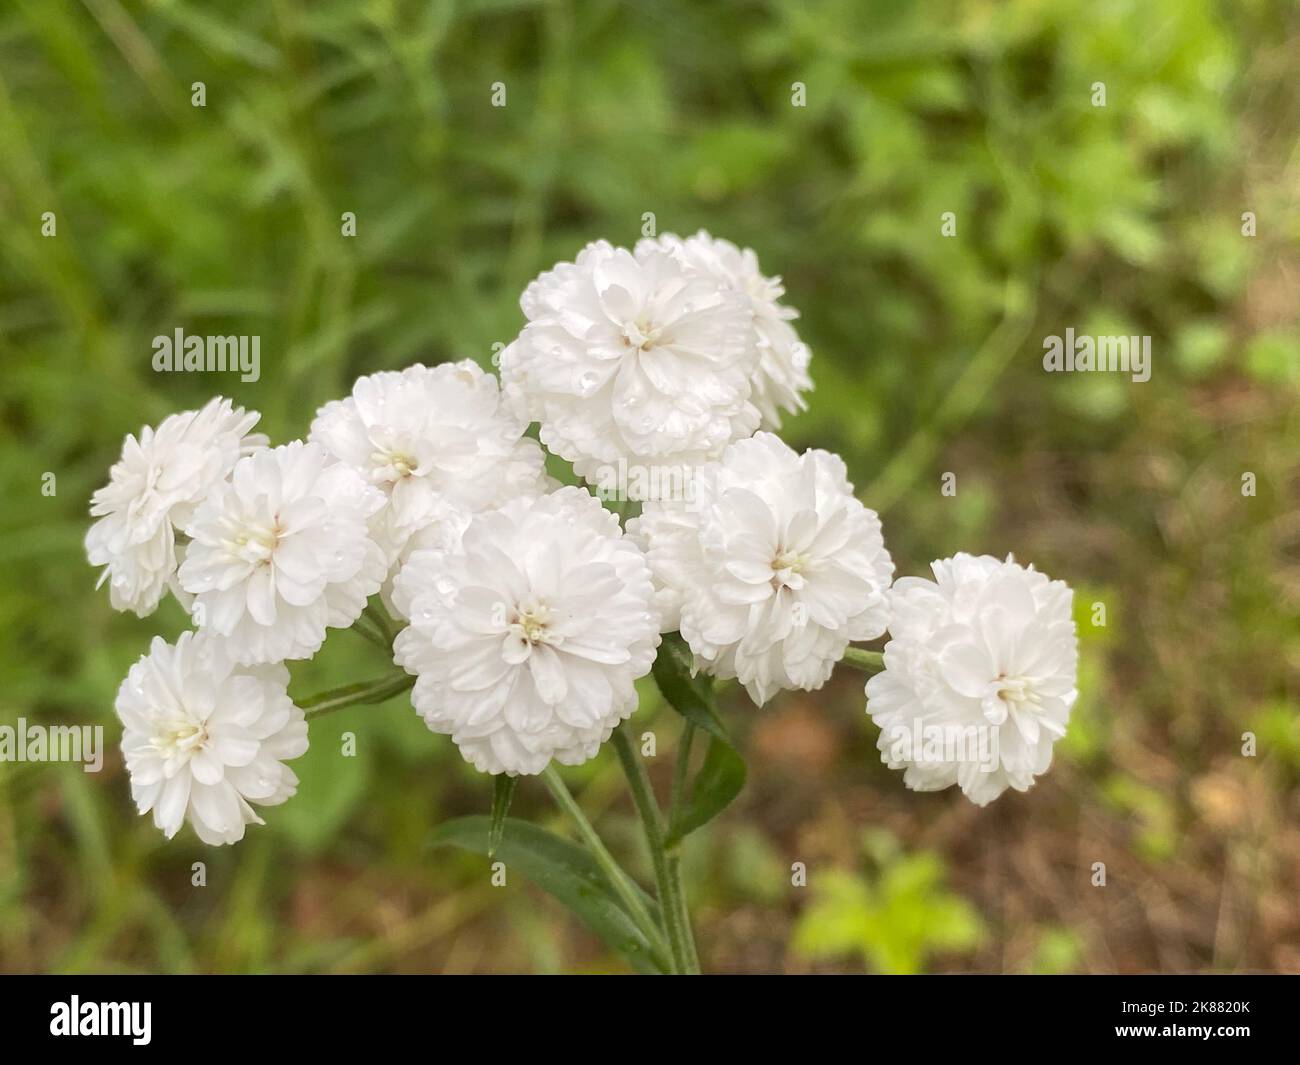 A closeup of Pearl Yarrow flowers in a garden Stock Photo